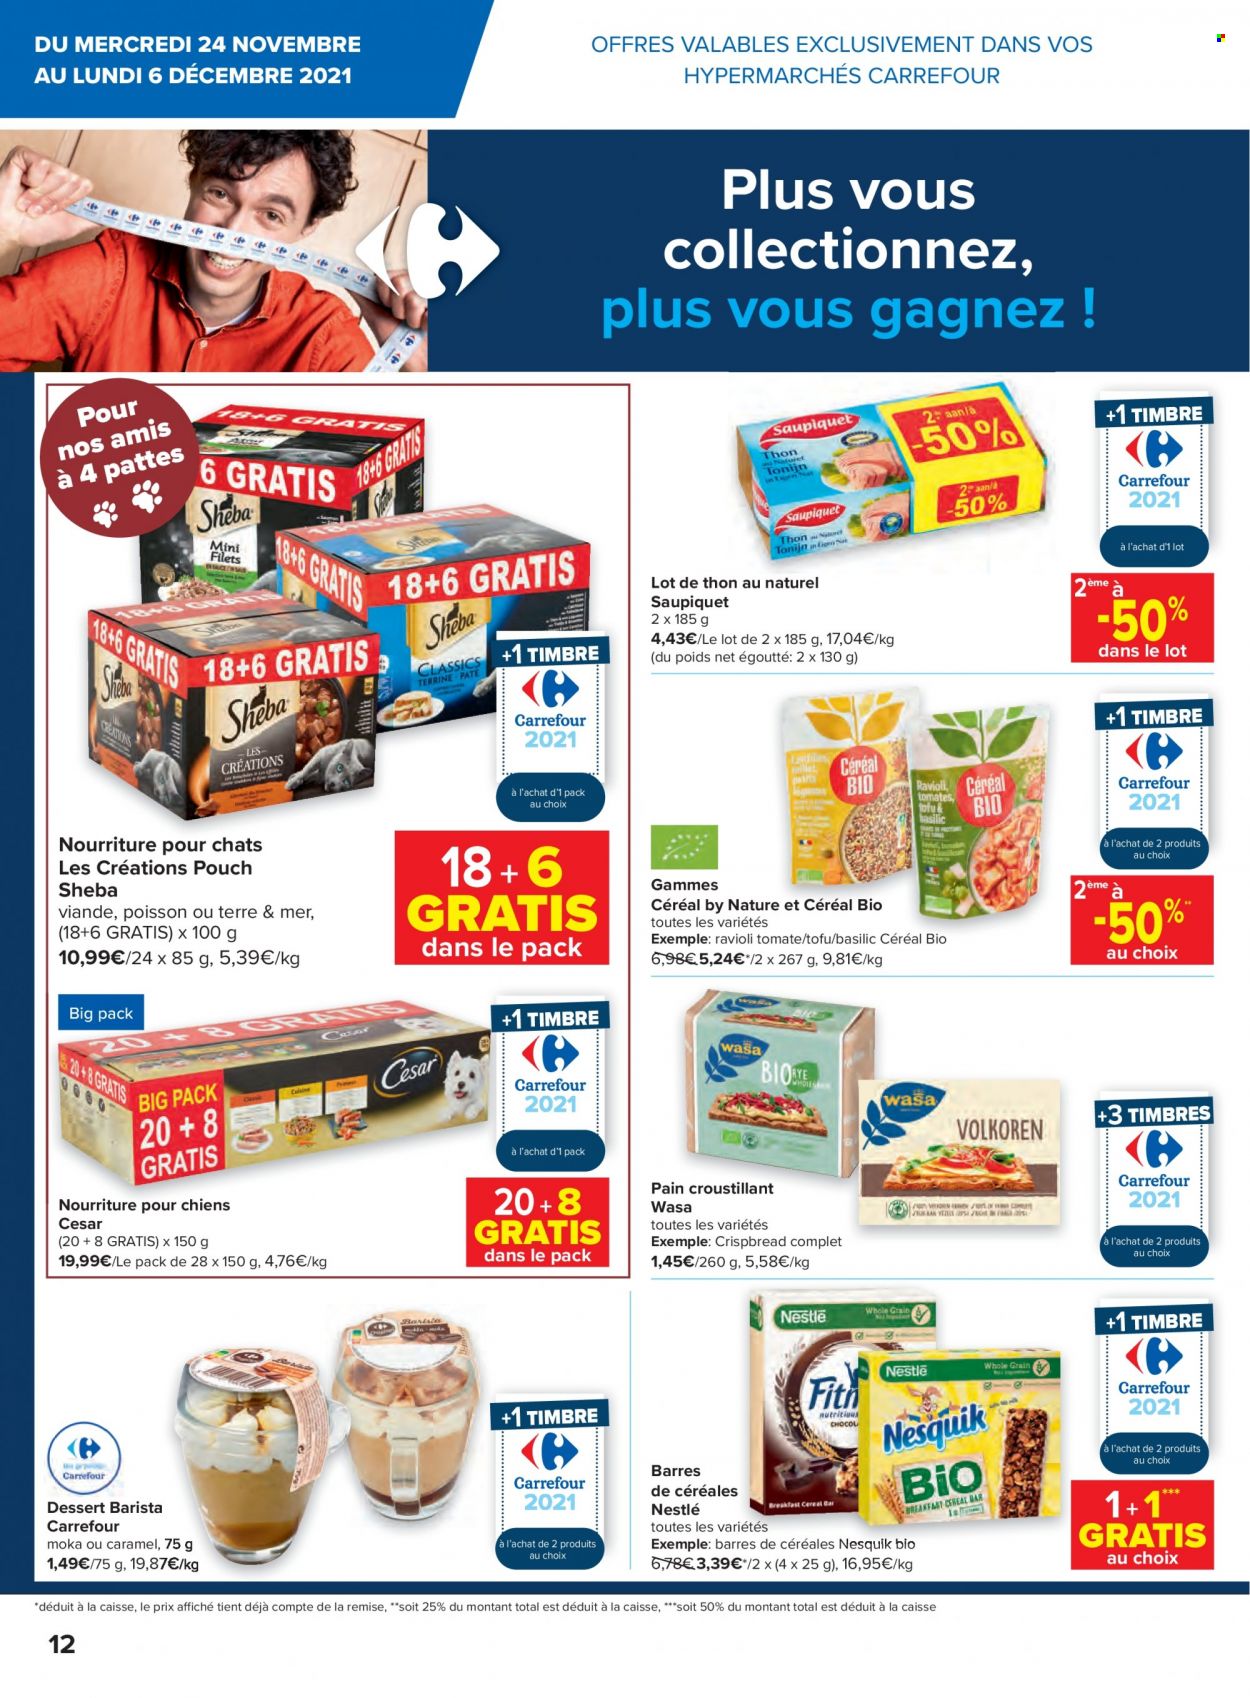 Catalogue Carrefour hypermarkt - 24.11.2021 - 6.12.2021. Page 12.